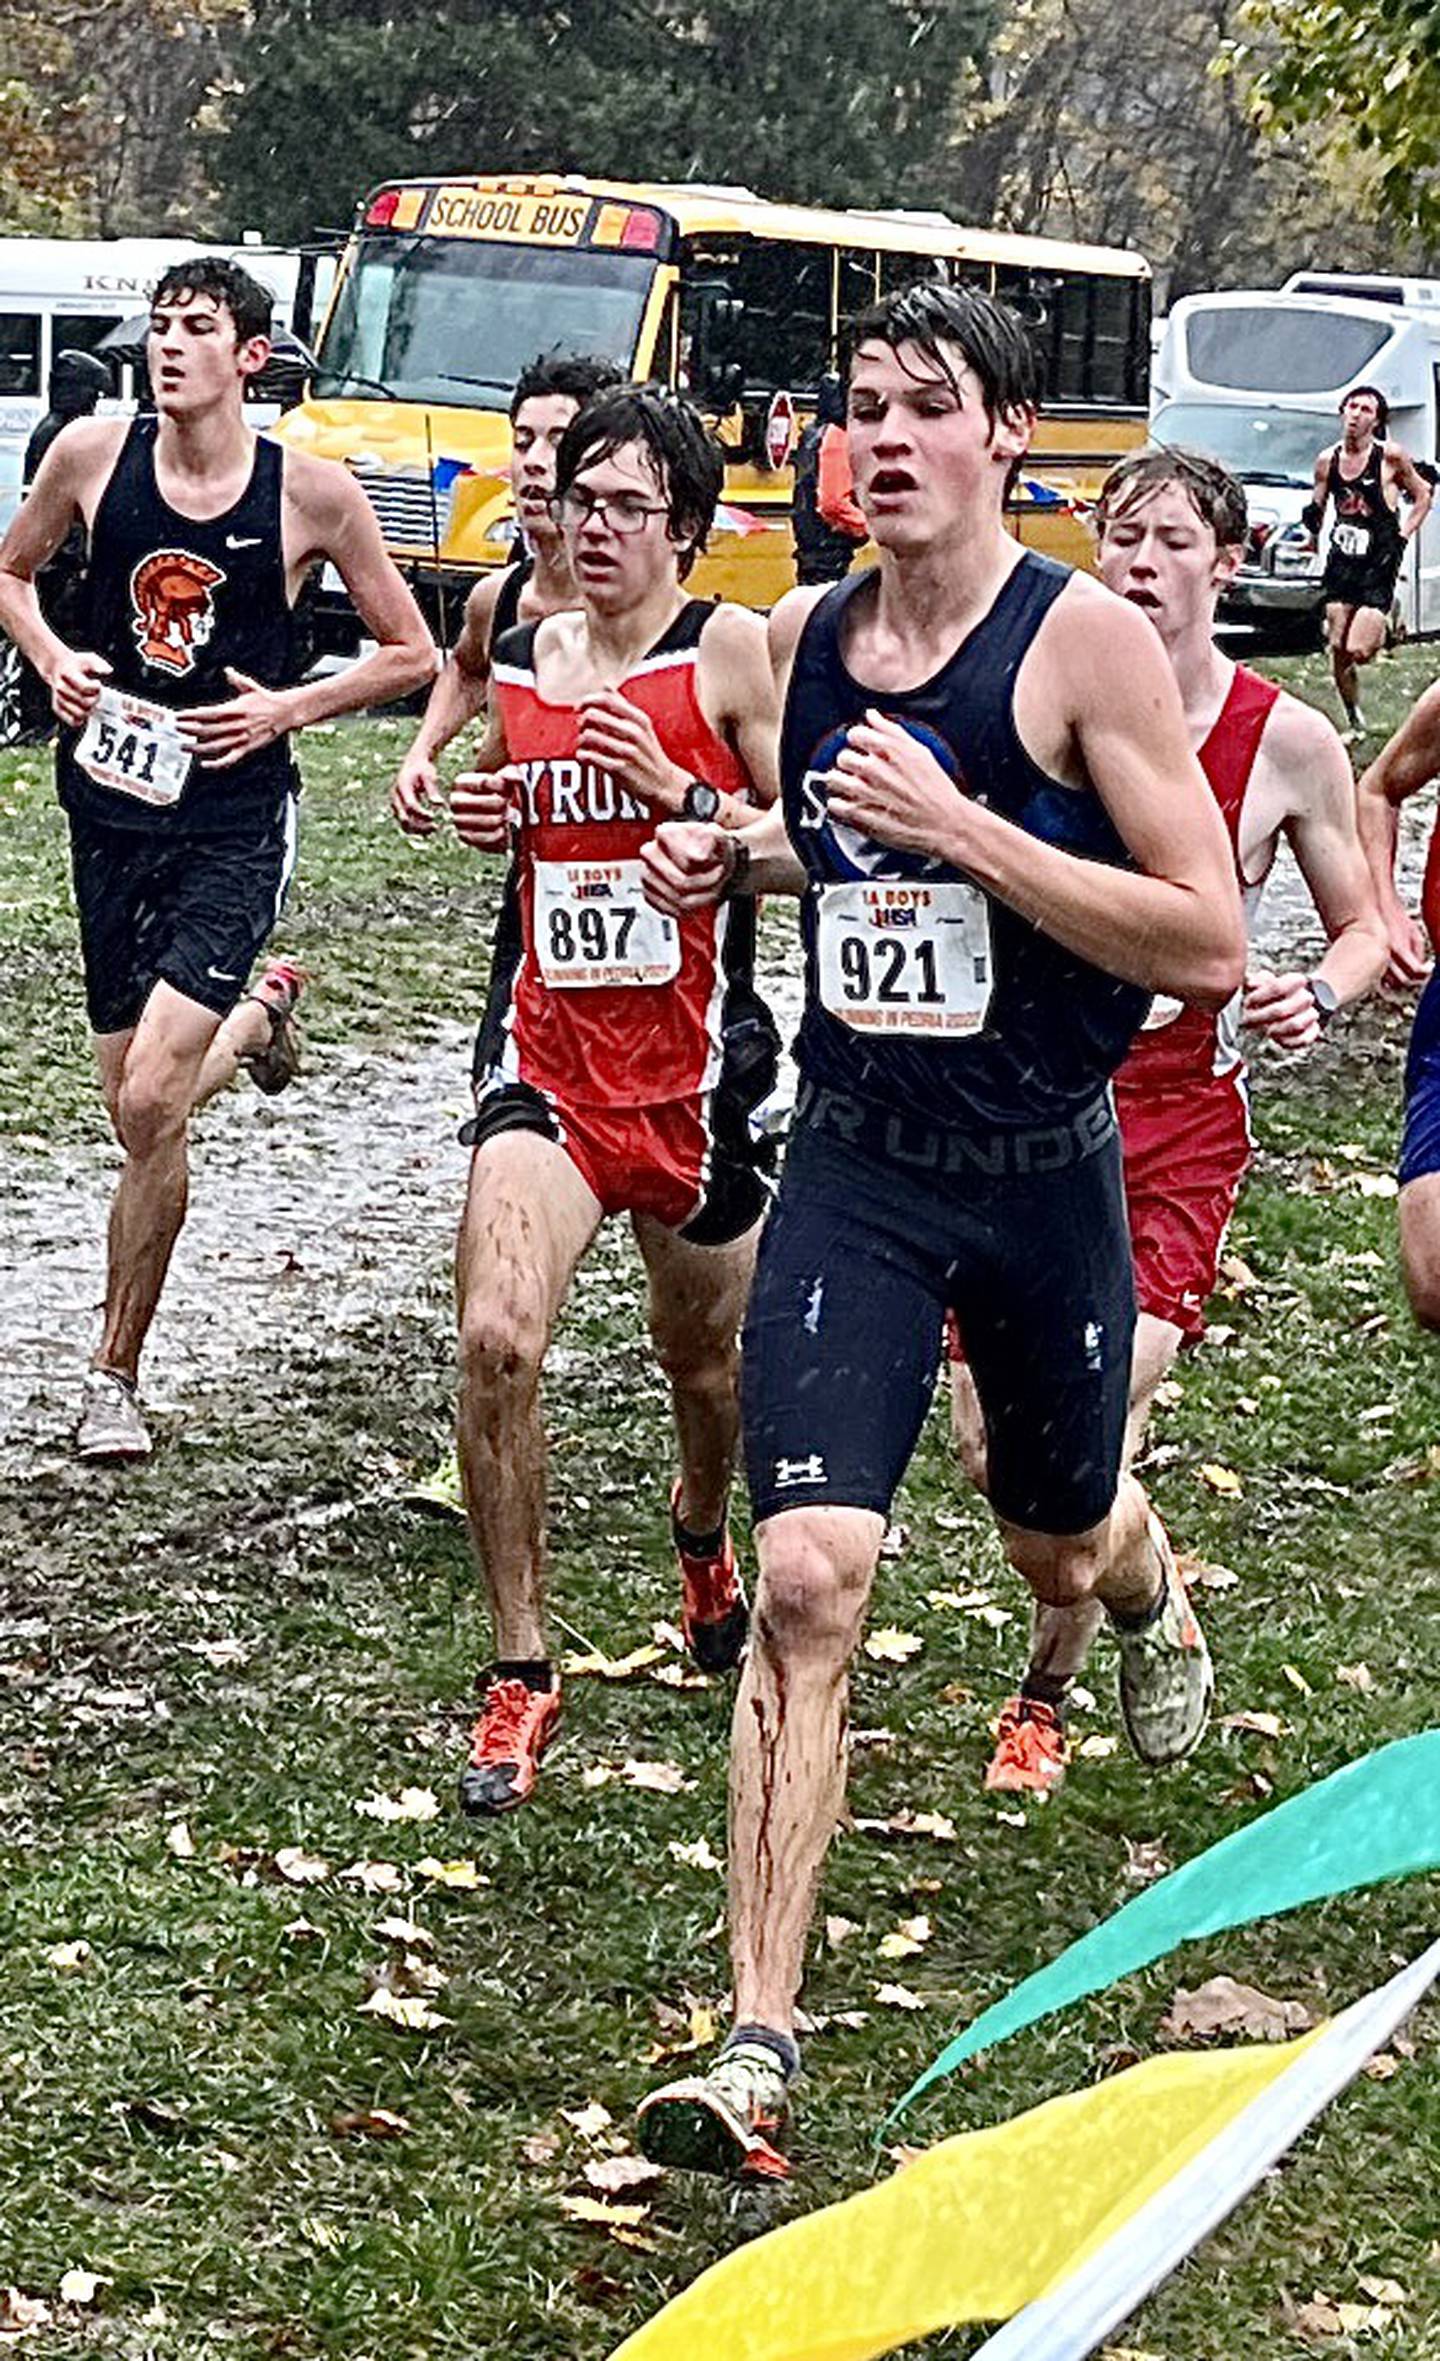 Bureau Valley senior Elijah House made his way through the rain and mud to a 60th-place finish in Saturday's IHSA 1A State Cross County Meet at Detweiller Park in Peoria.